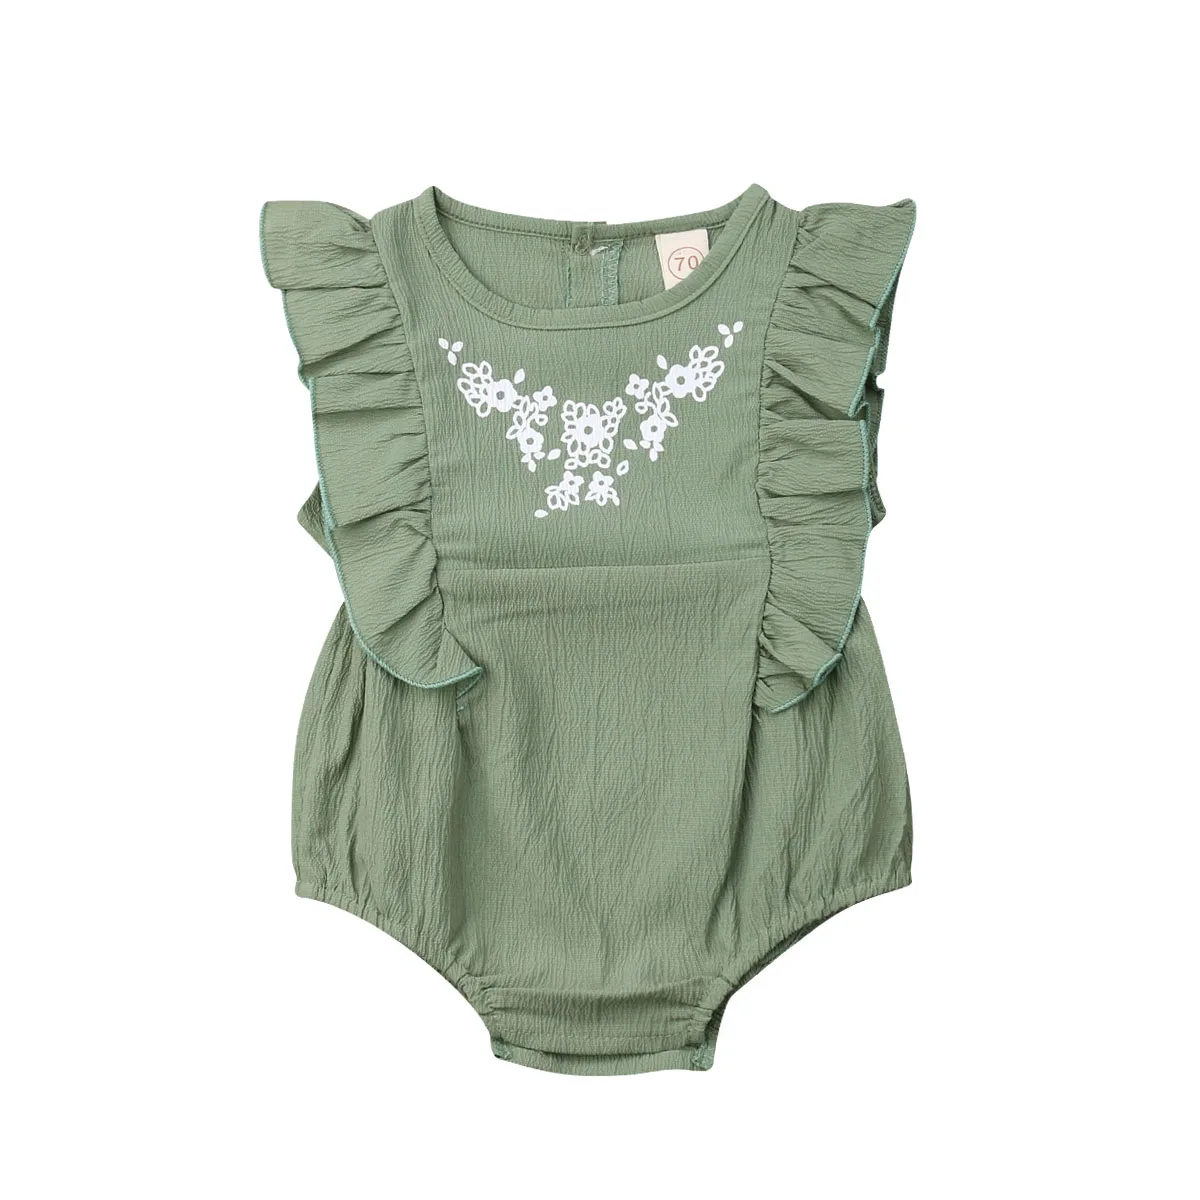 

2019 Cute Newborn Infant Baby Girls Ruffled Sleeveless Romper Floral Jumpsuit Playsuit Summer Outfit 0-24M